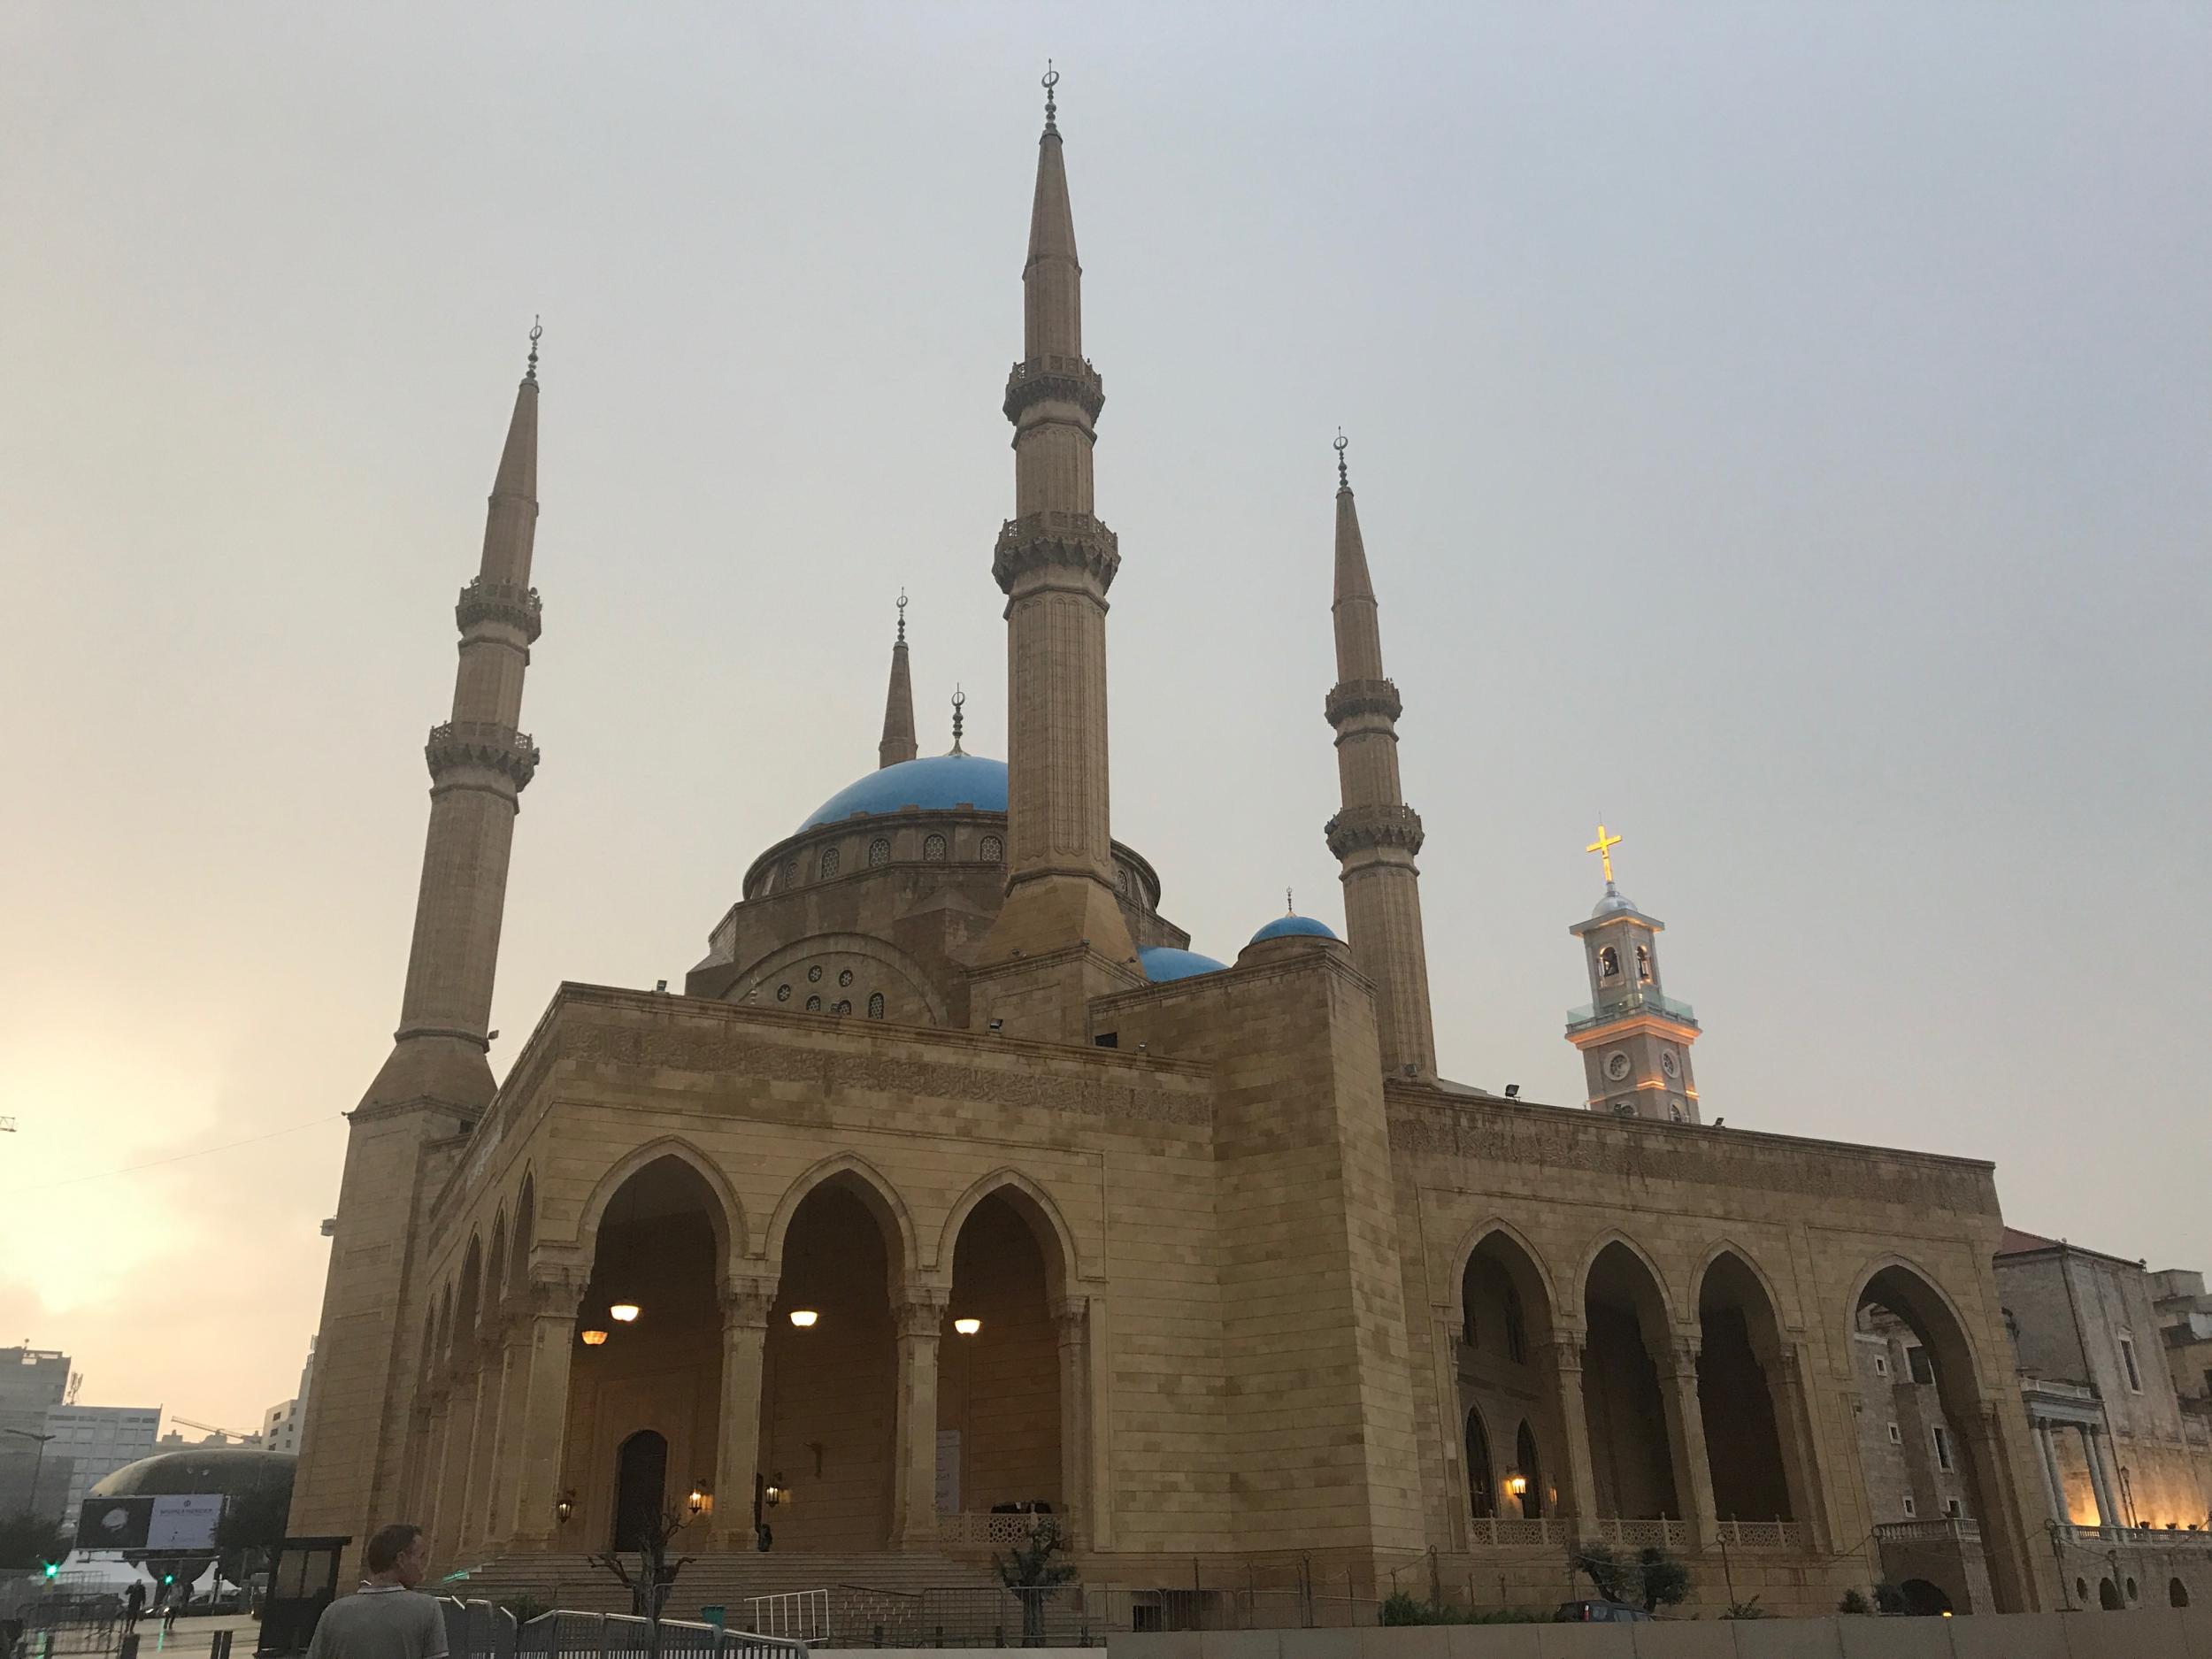 The Blue Mosque, which dominates Martyrs Square